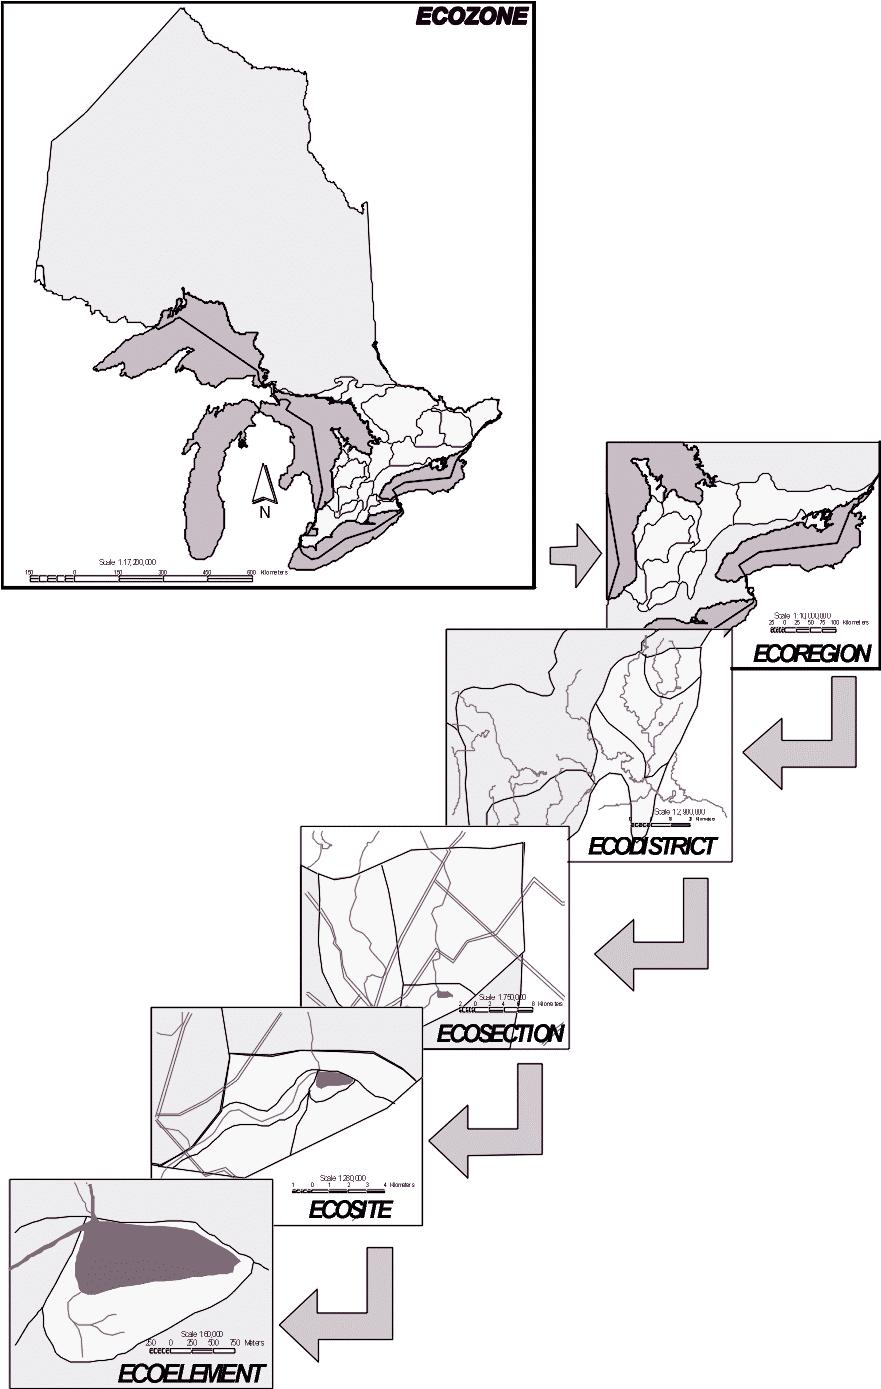 Classification scales using the age-of-onset and duration periods described in the report Old Growth Forest Definitions for Ontario (MNR 2003).